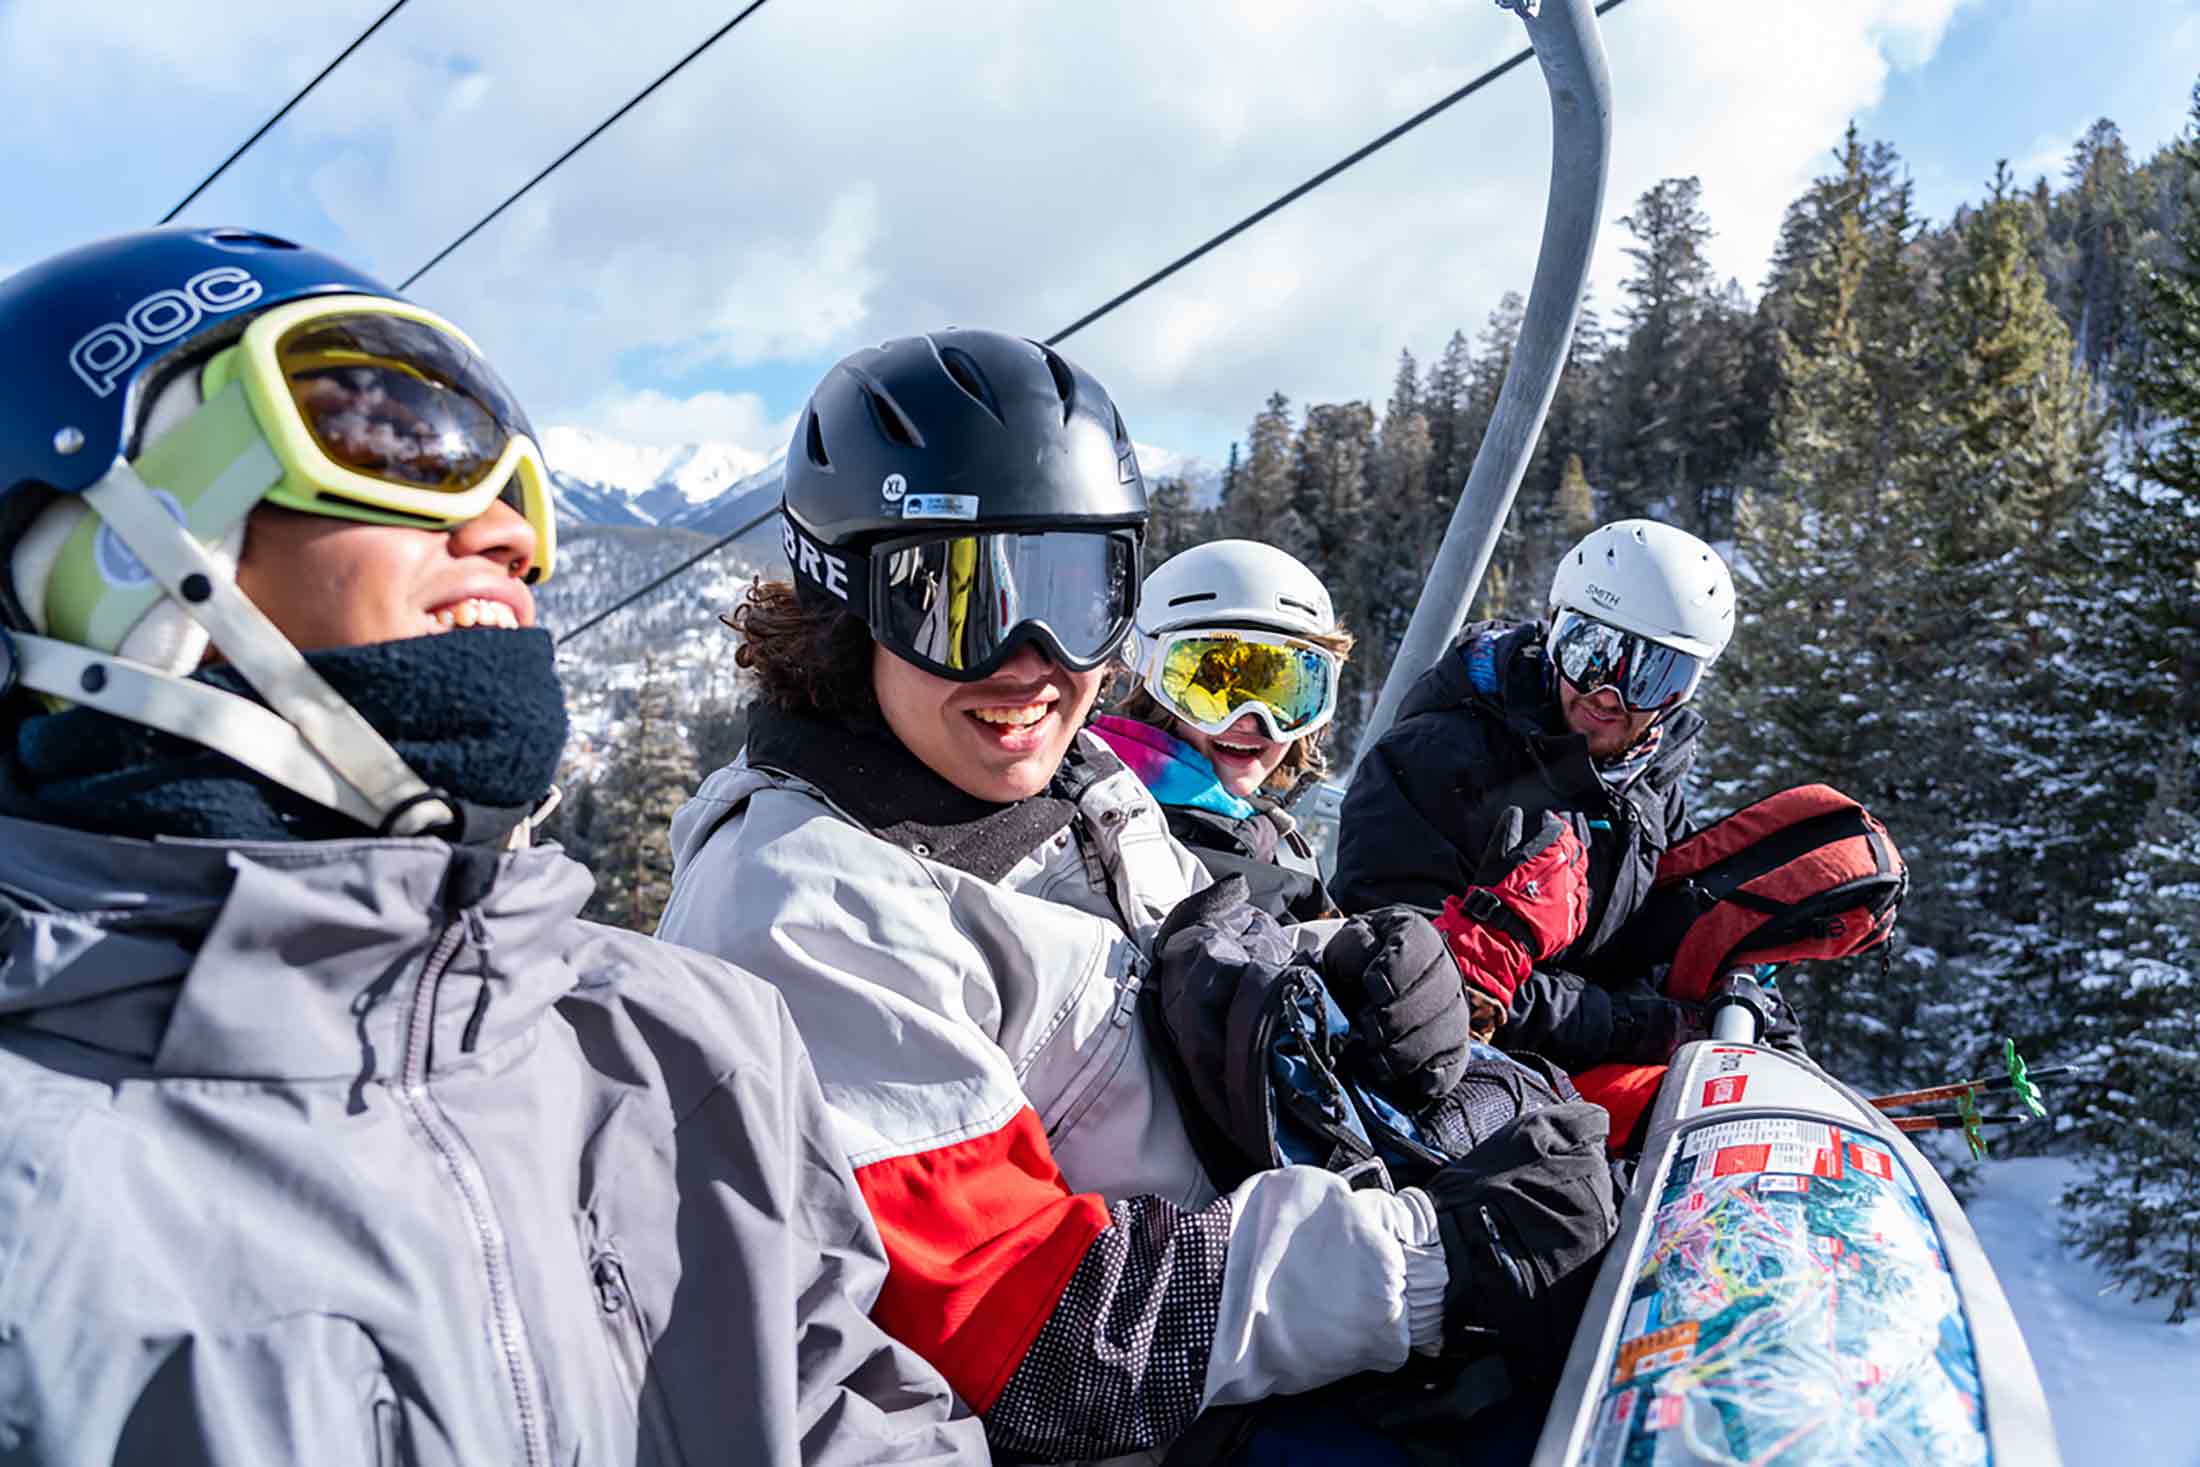 Skiers on a chair lift in Summit County